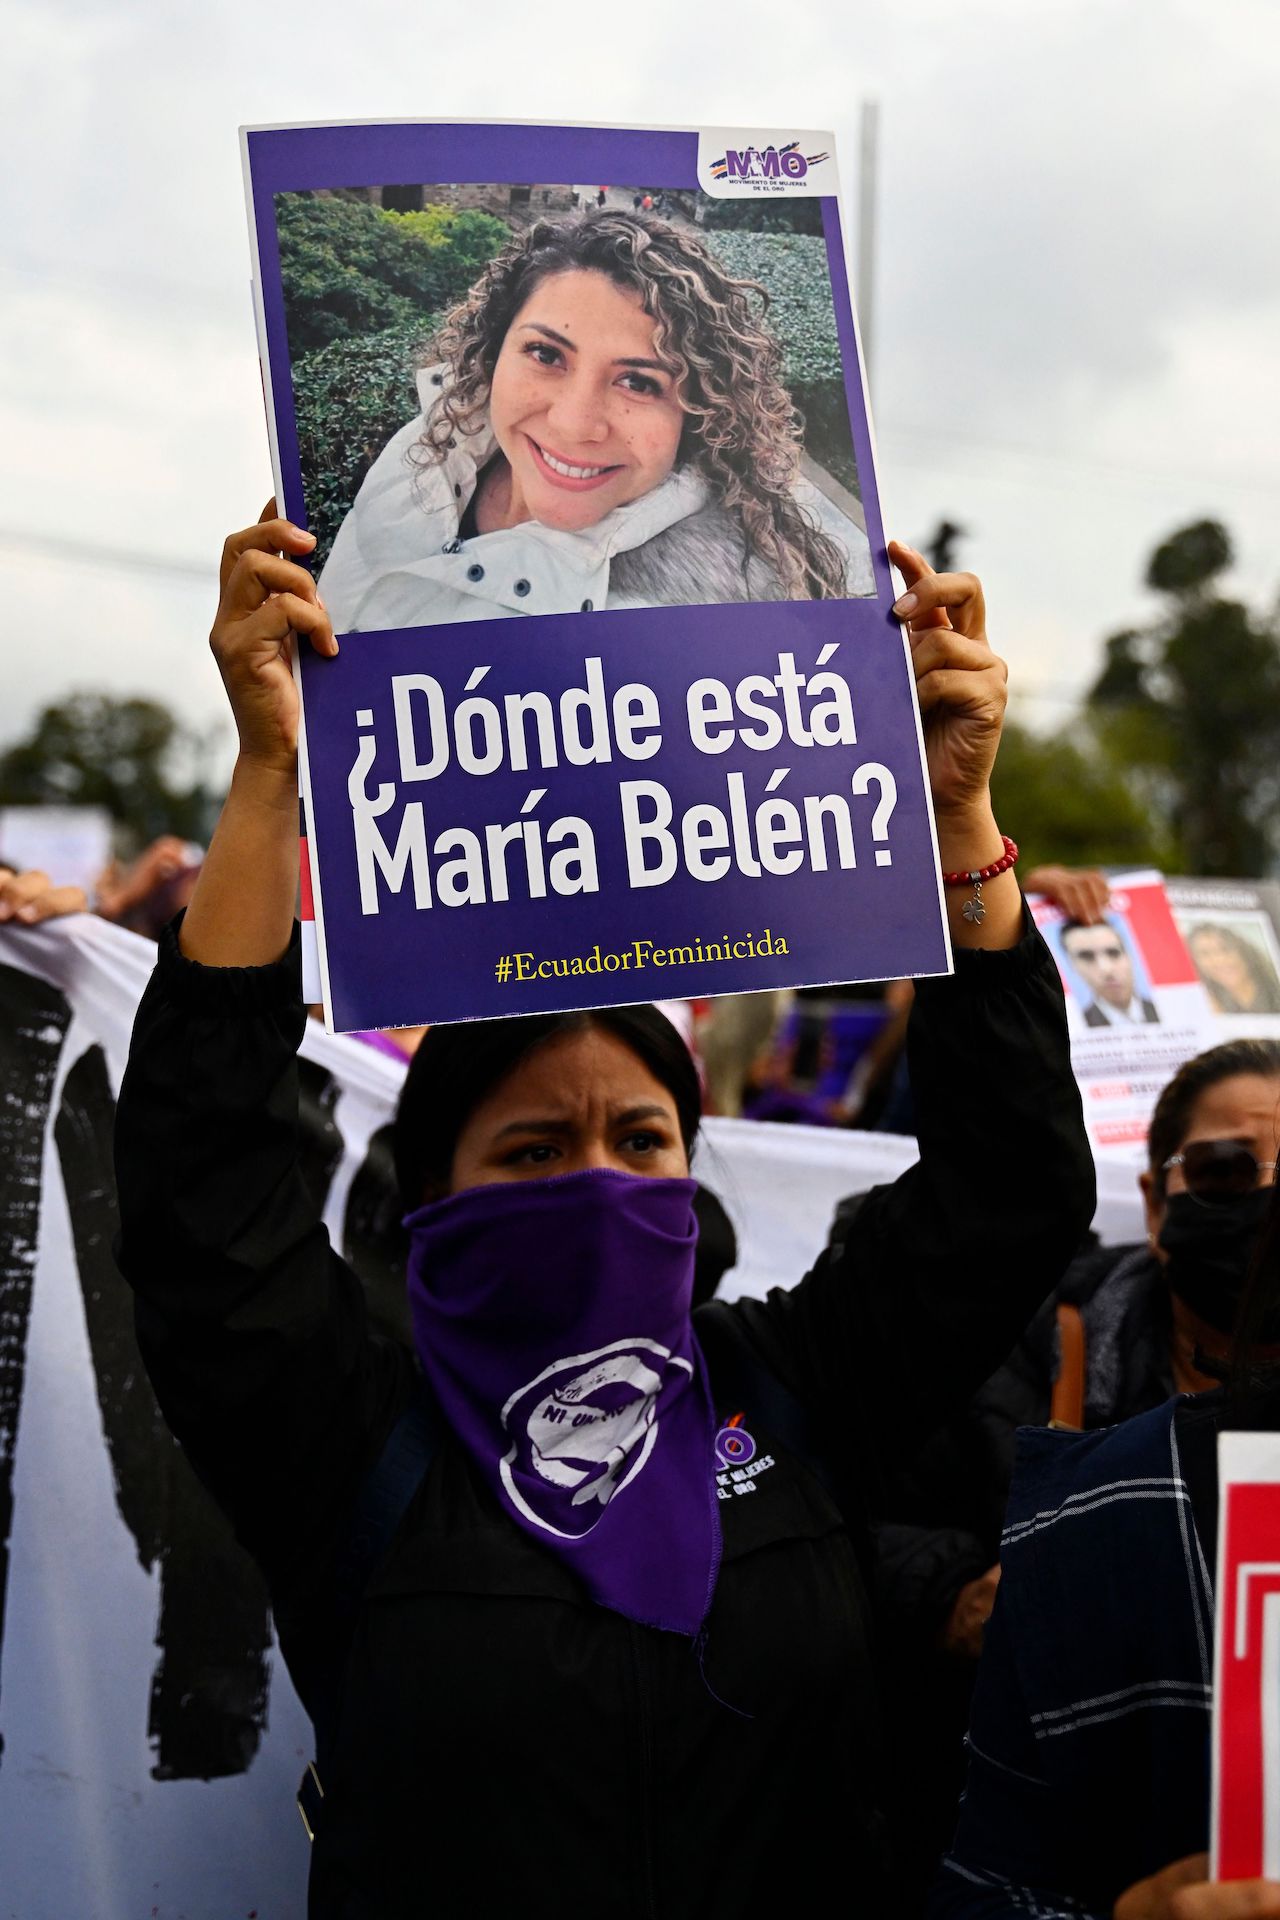 This Ecuadorian Woman Lawyer Has Been Found Dead After Going Missing And People Want Justice